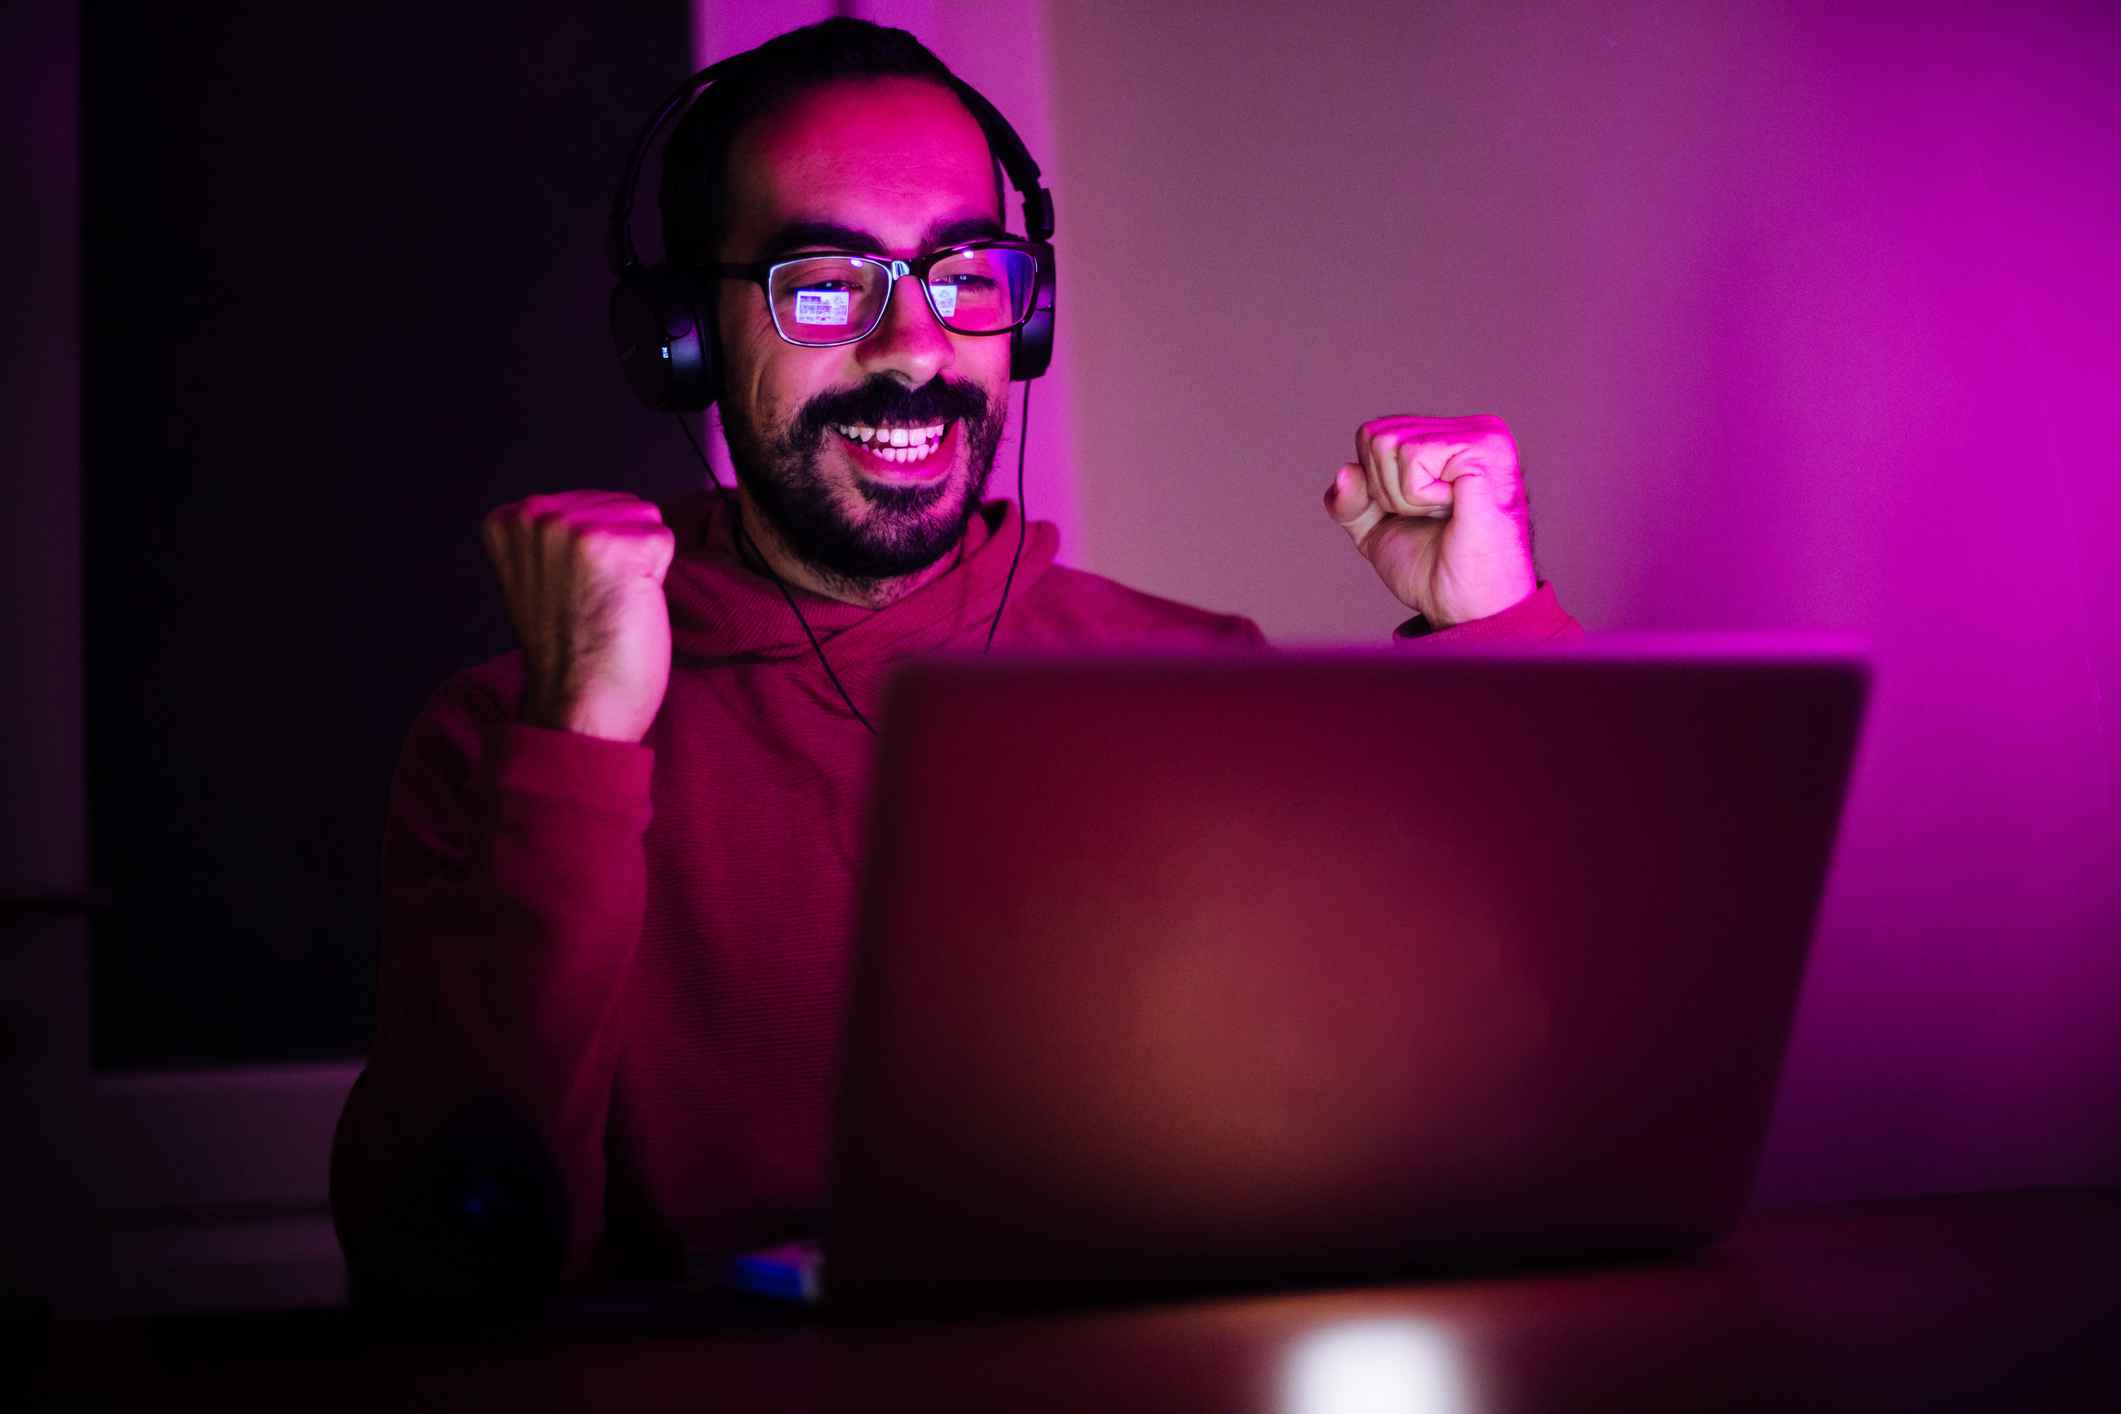 man excited in front of a computer screen